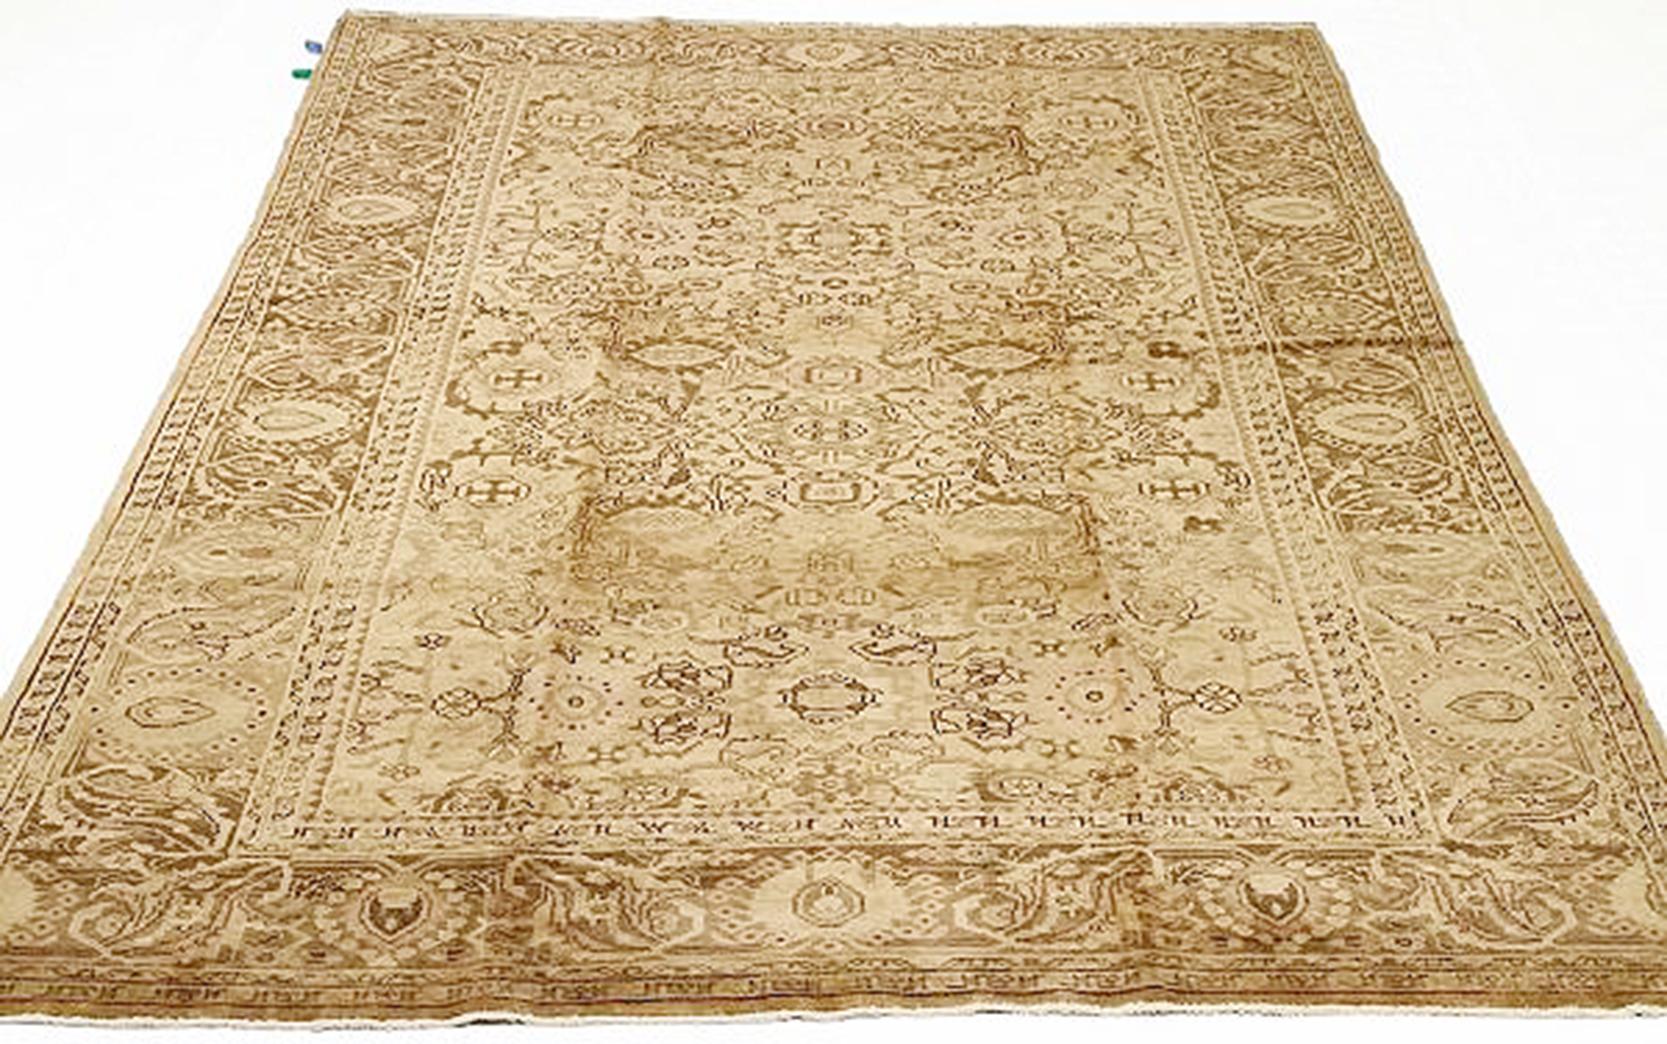 Antique Persian rug handwoven from the finest sheep’s wool and colored with all-natural vegetable dyes that are safe for humans and pets. It’s a traditional Malayer design featuring brown floral and geometric details over a beige field. It’s a